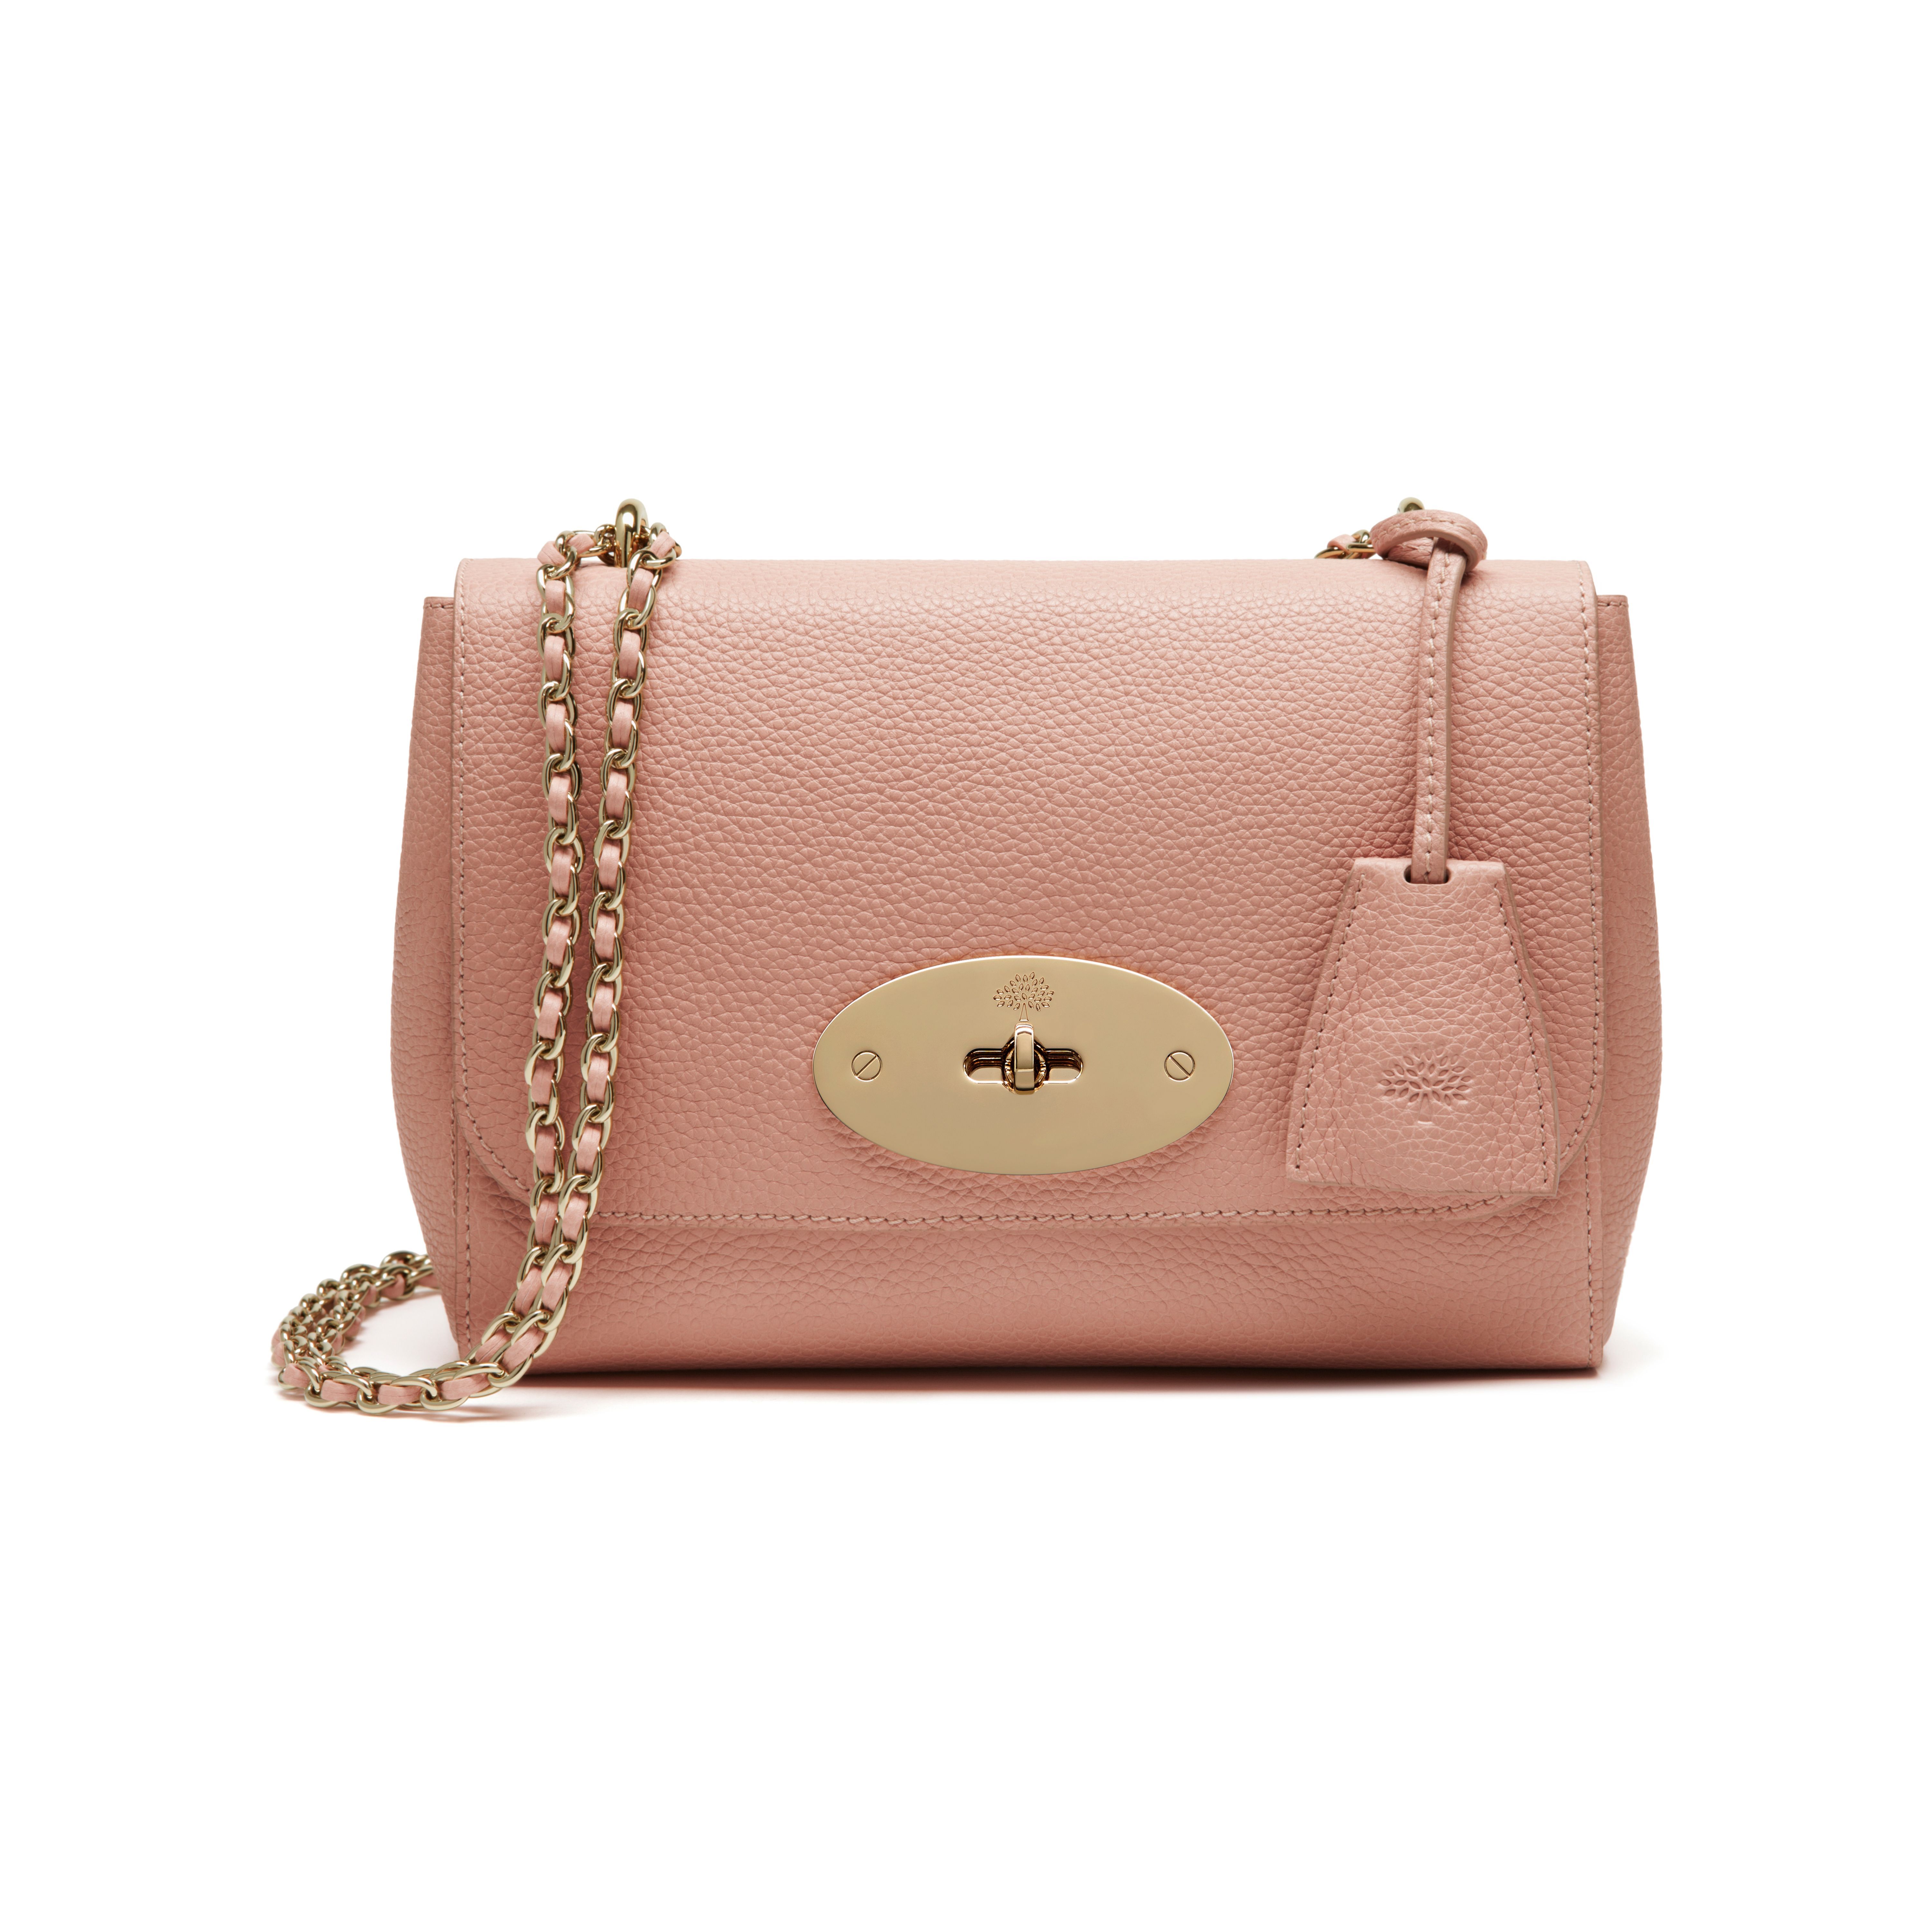 Mulberry - Lily in Rose Petal Small Classic Grain | My Wish List ...